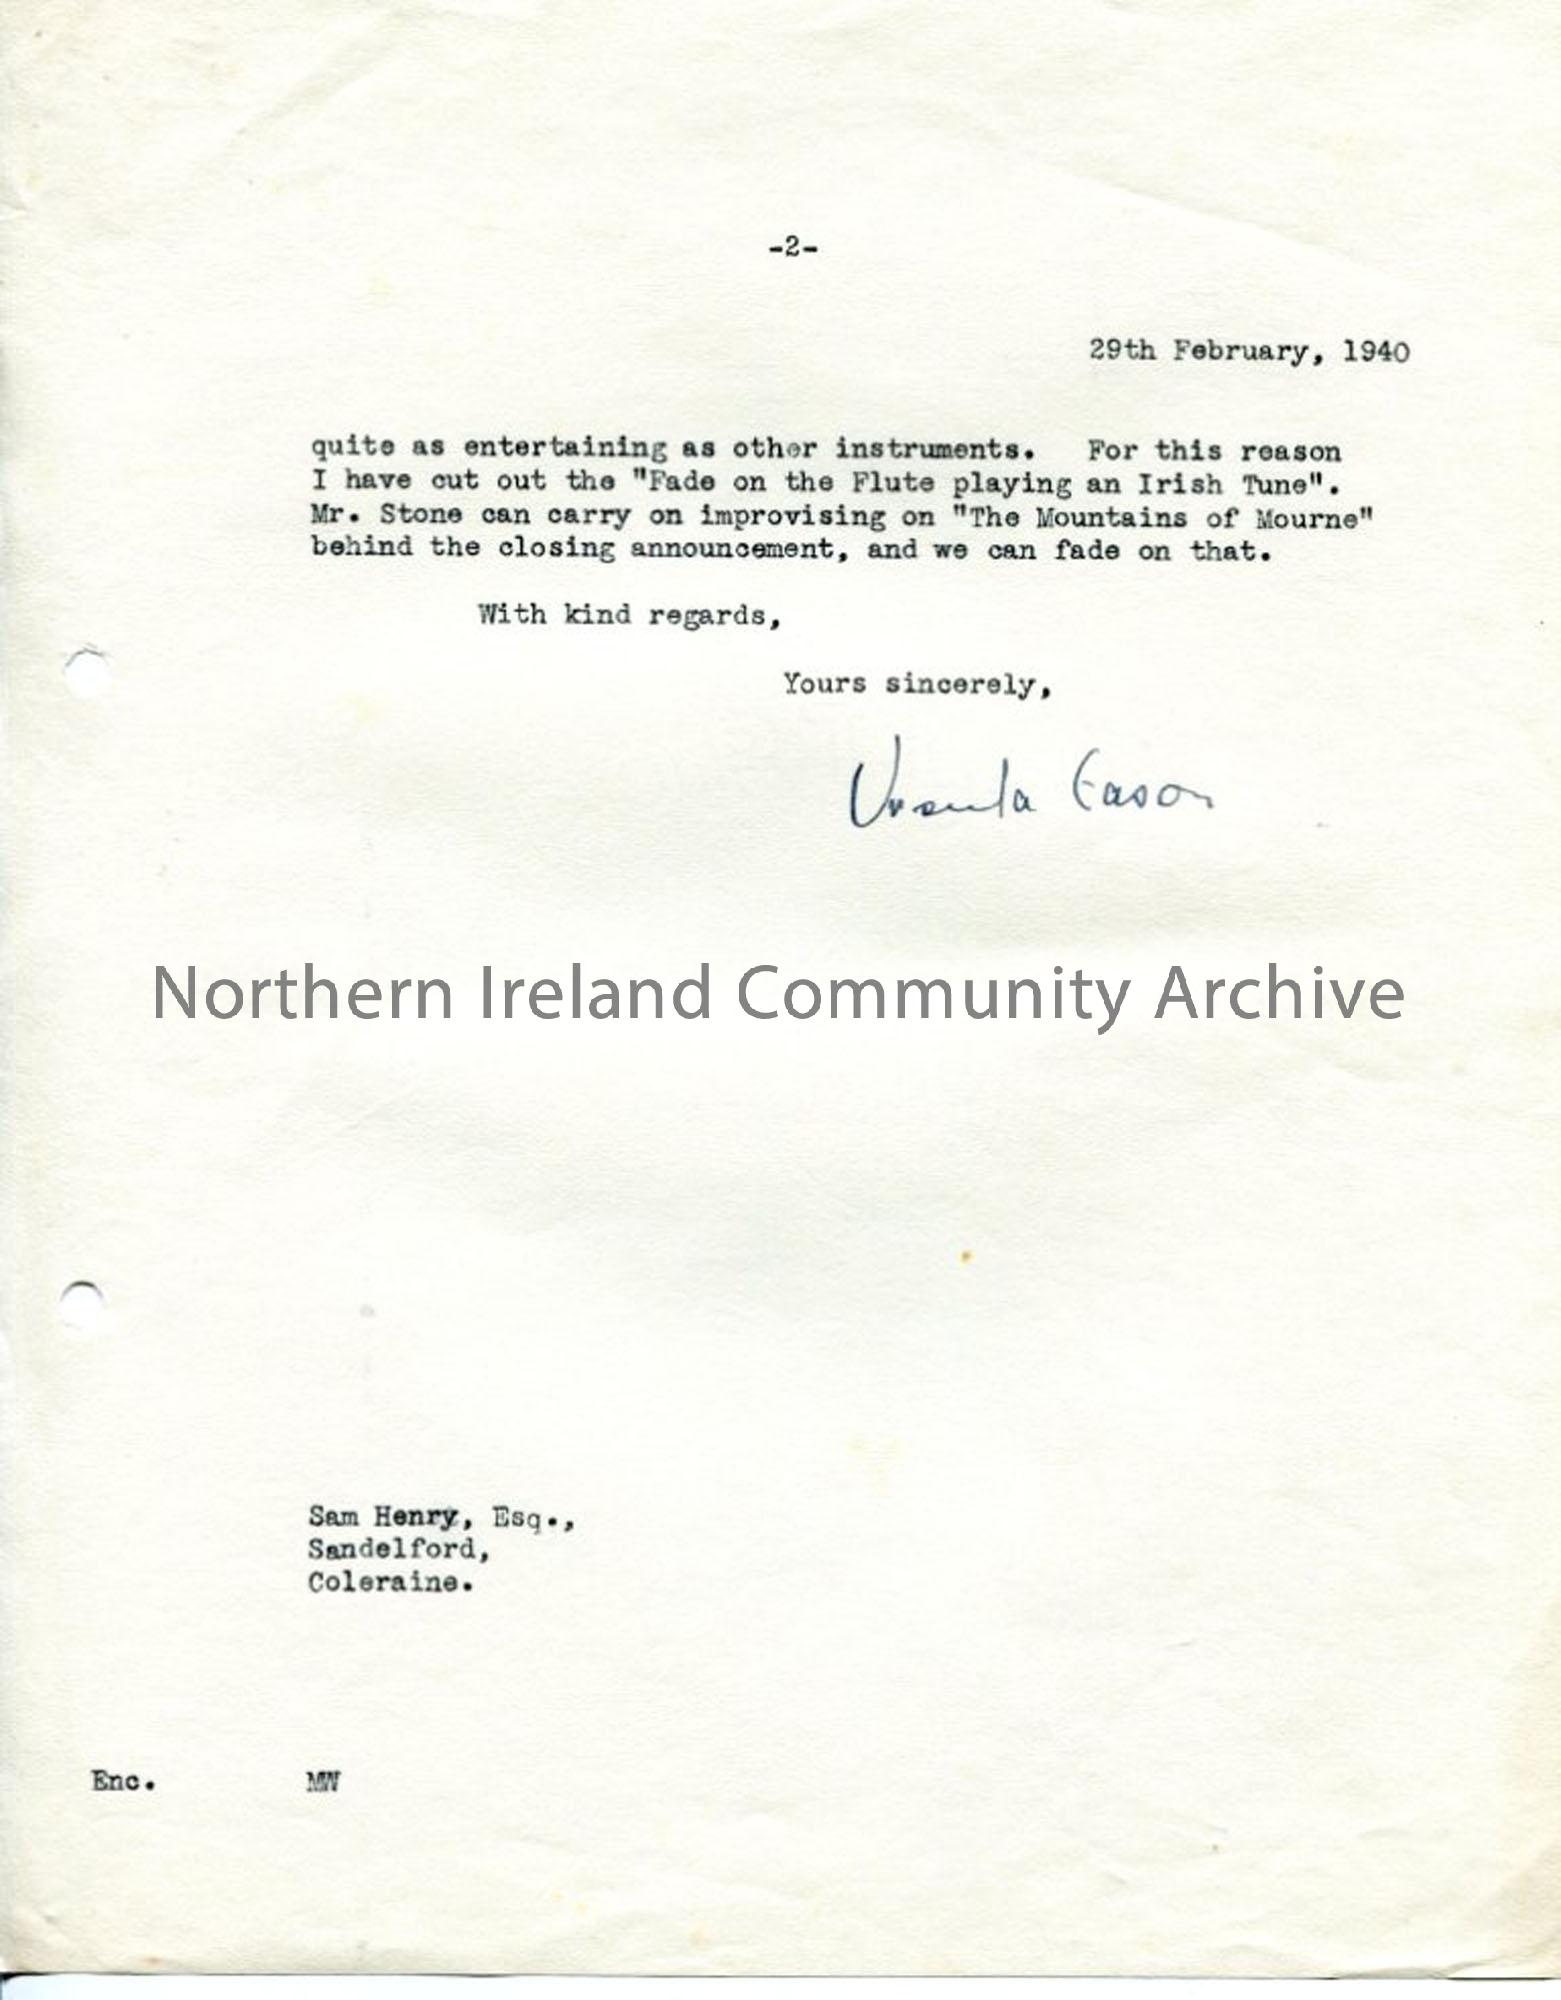 Page 2 of 2: Letter from Ursula Eason, dated 29.2.1940